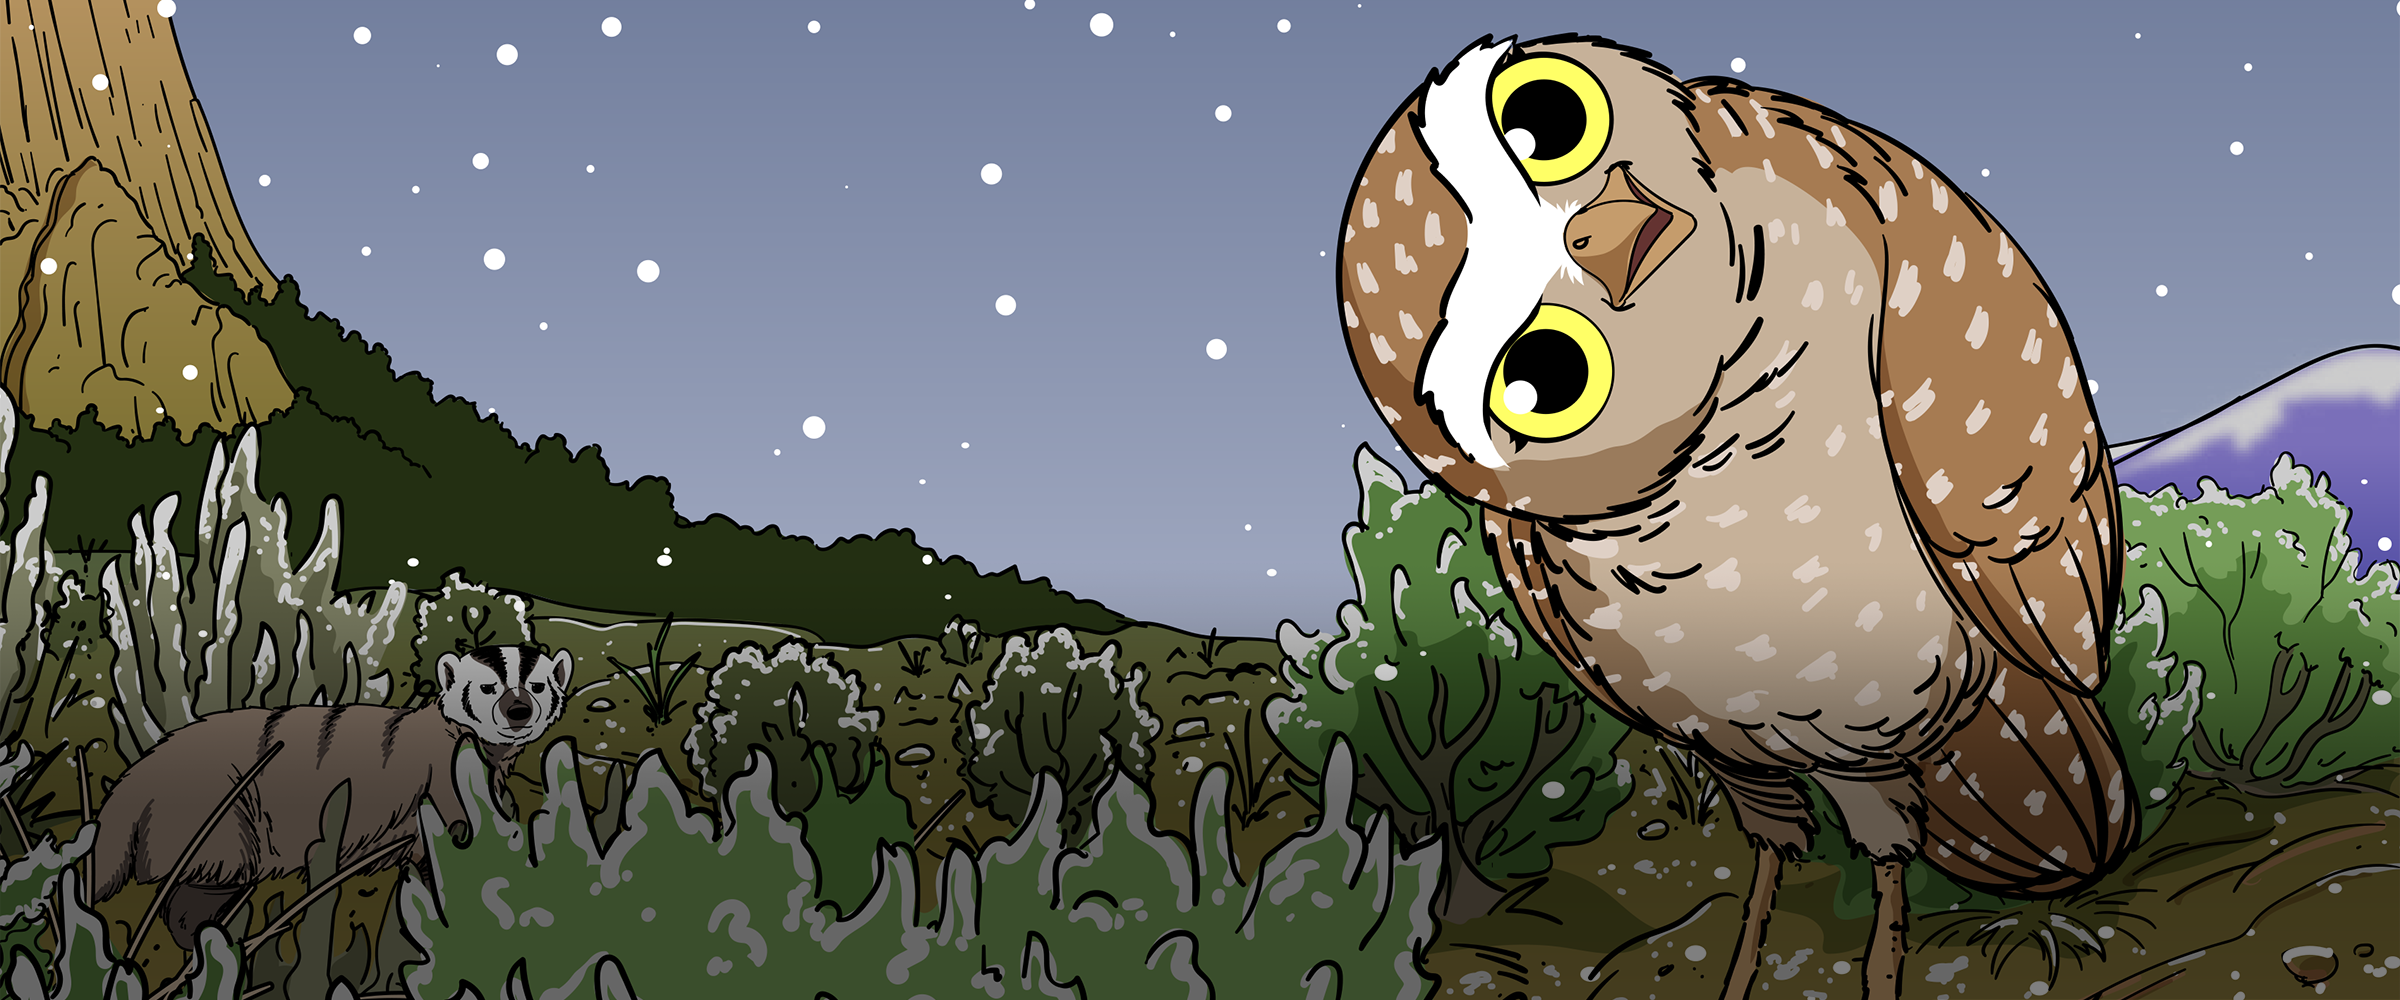 An illustration of a Burrowing Owl in the sagebrush steppe with snow falling and a badger in the background.